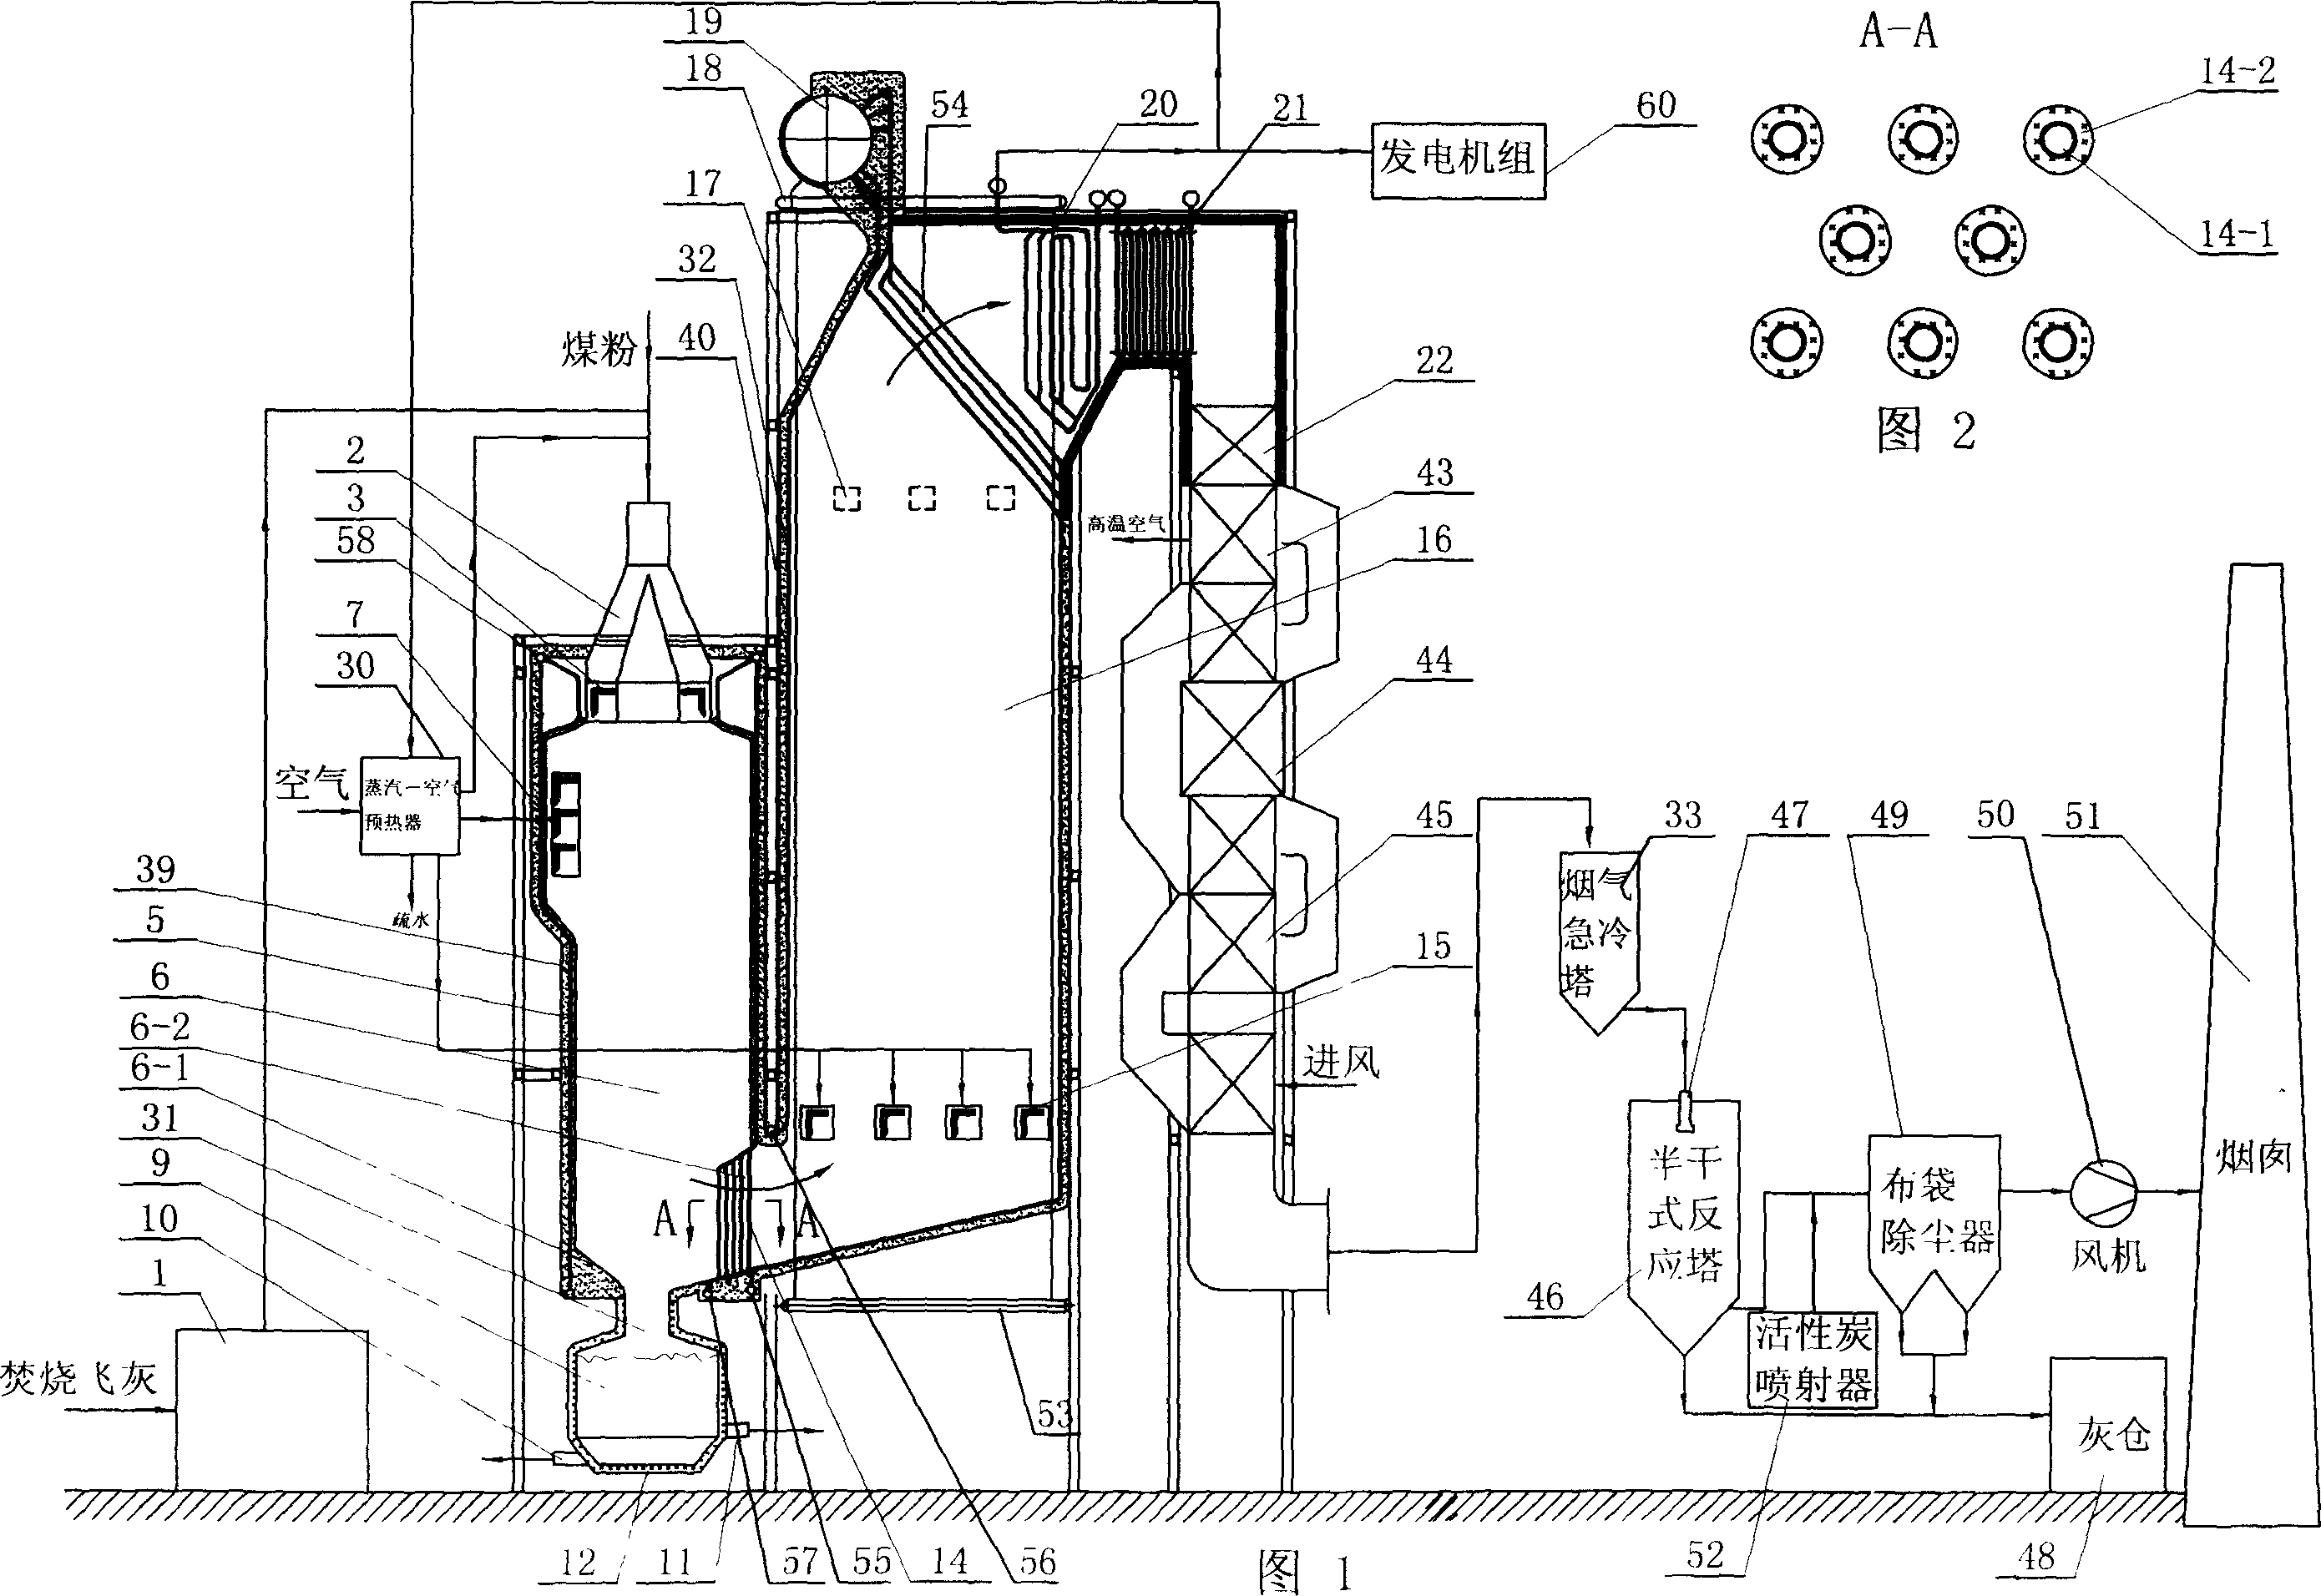 Method of processing refuse burning fly ash through cyclone furnace high temperature melting